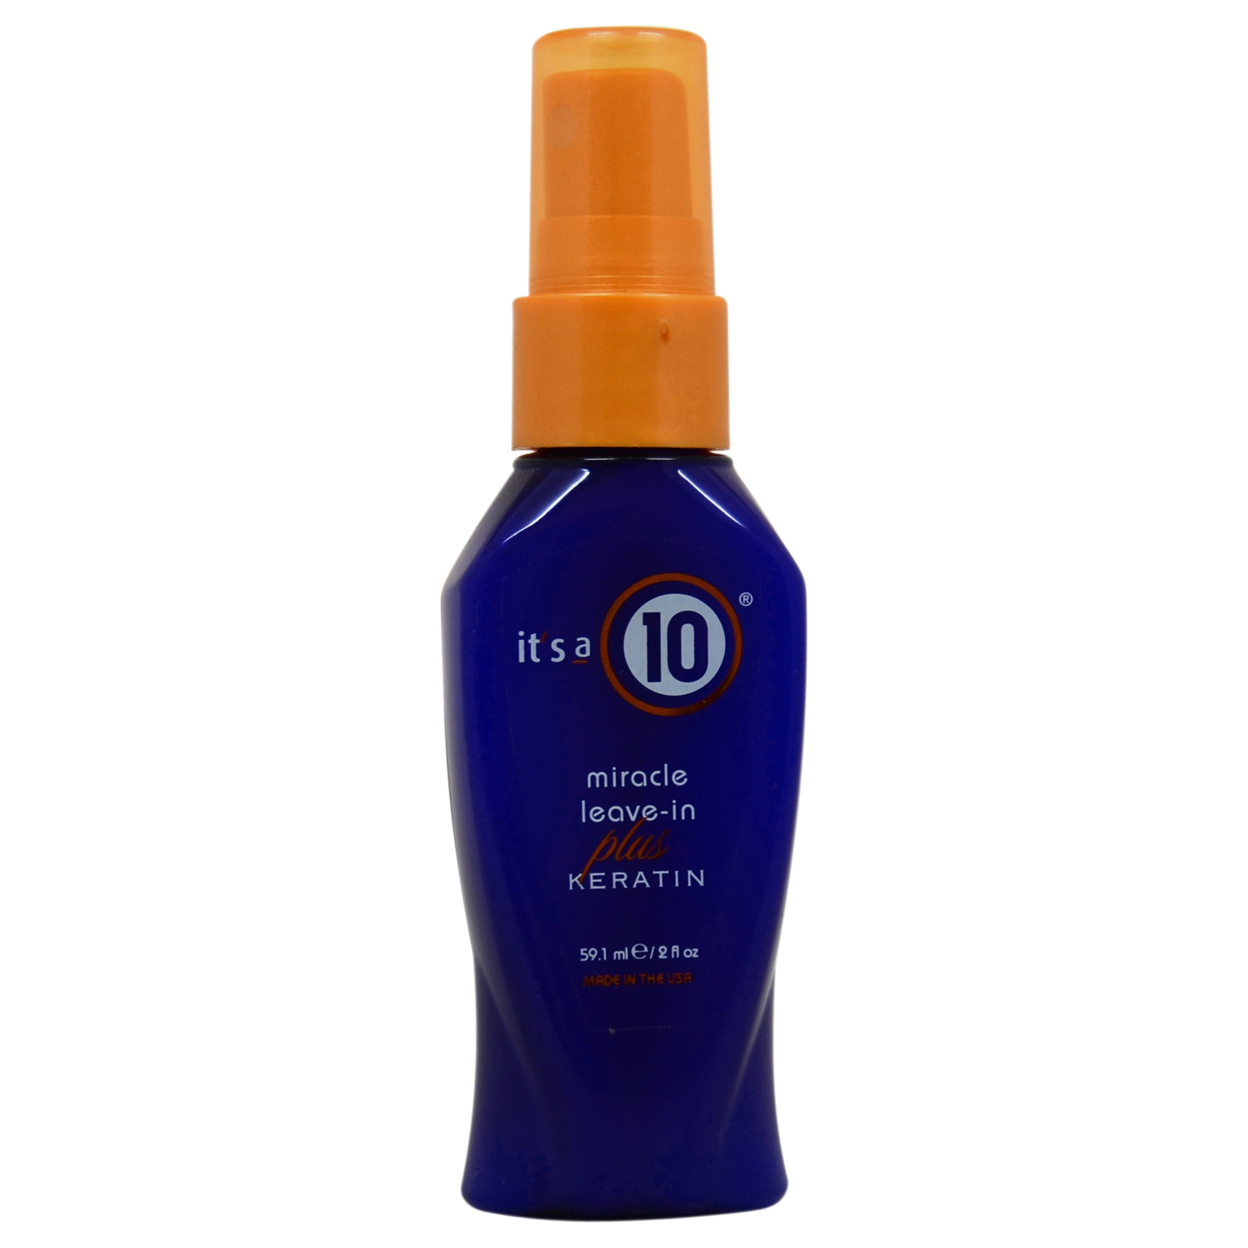 It's A 10 Miracle Leave-In Plus Keratin 2.0oz - image 1 of 2